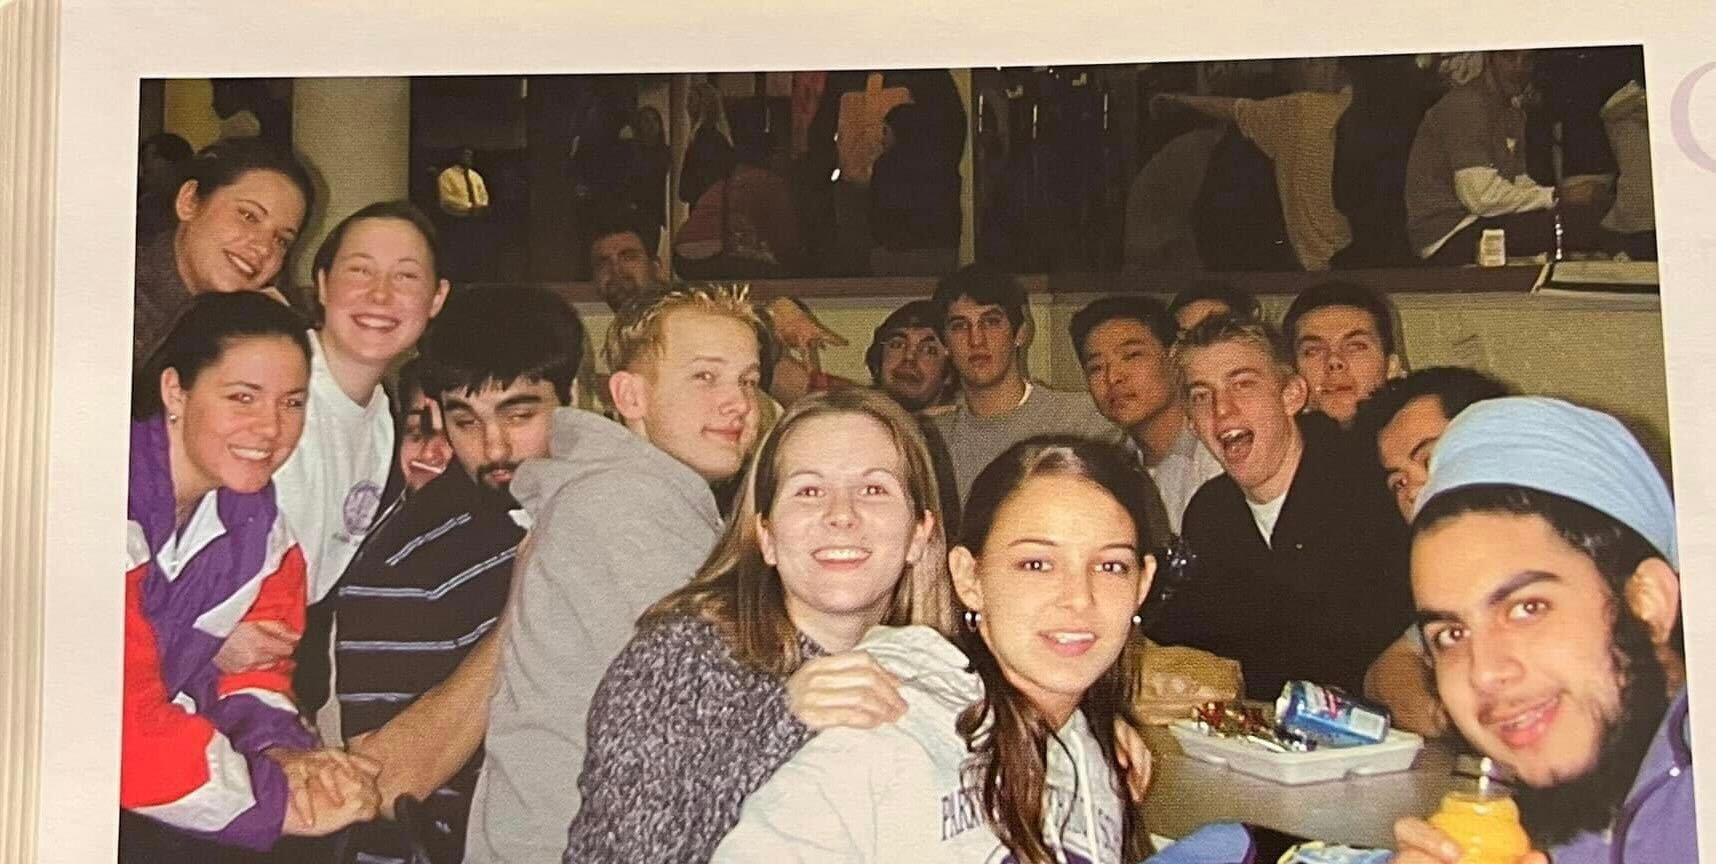 Adriane and Jesse in high school (in the front)